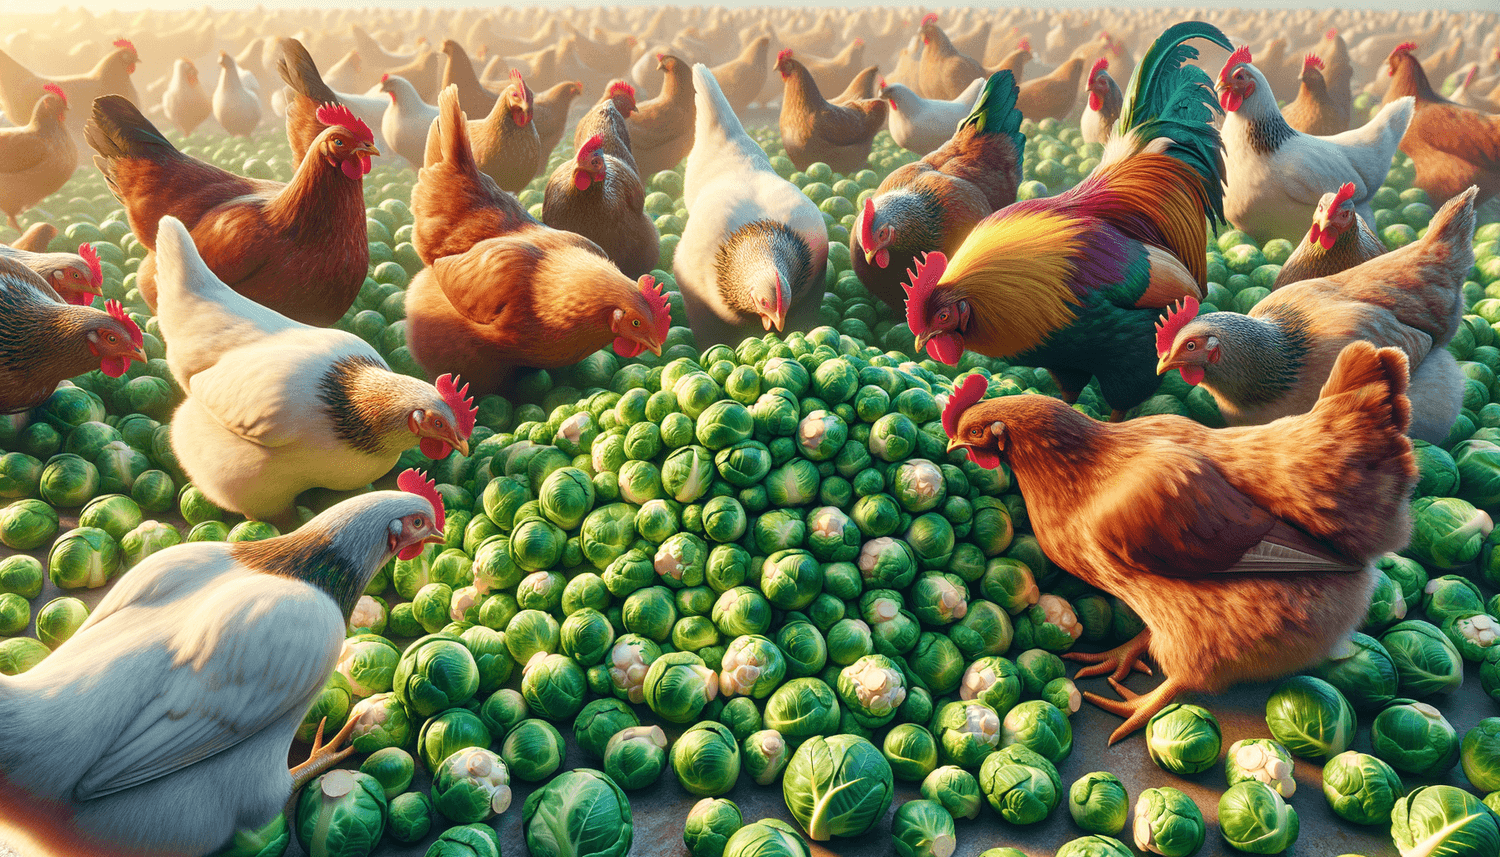 Can Chickens Eat Brussel Sprout Leaves?